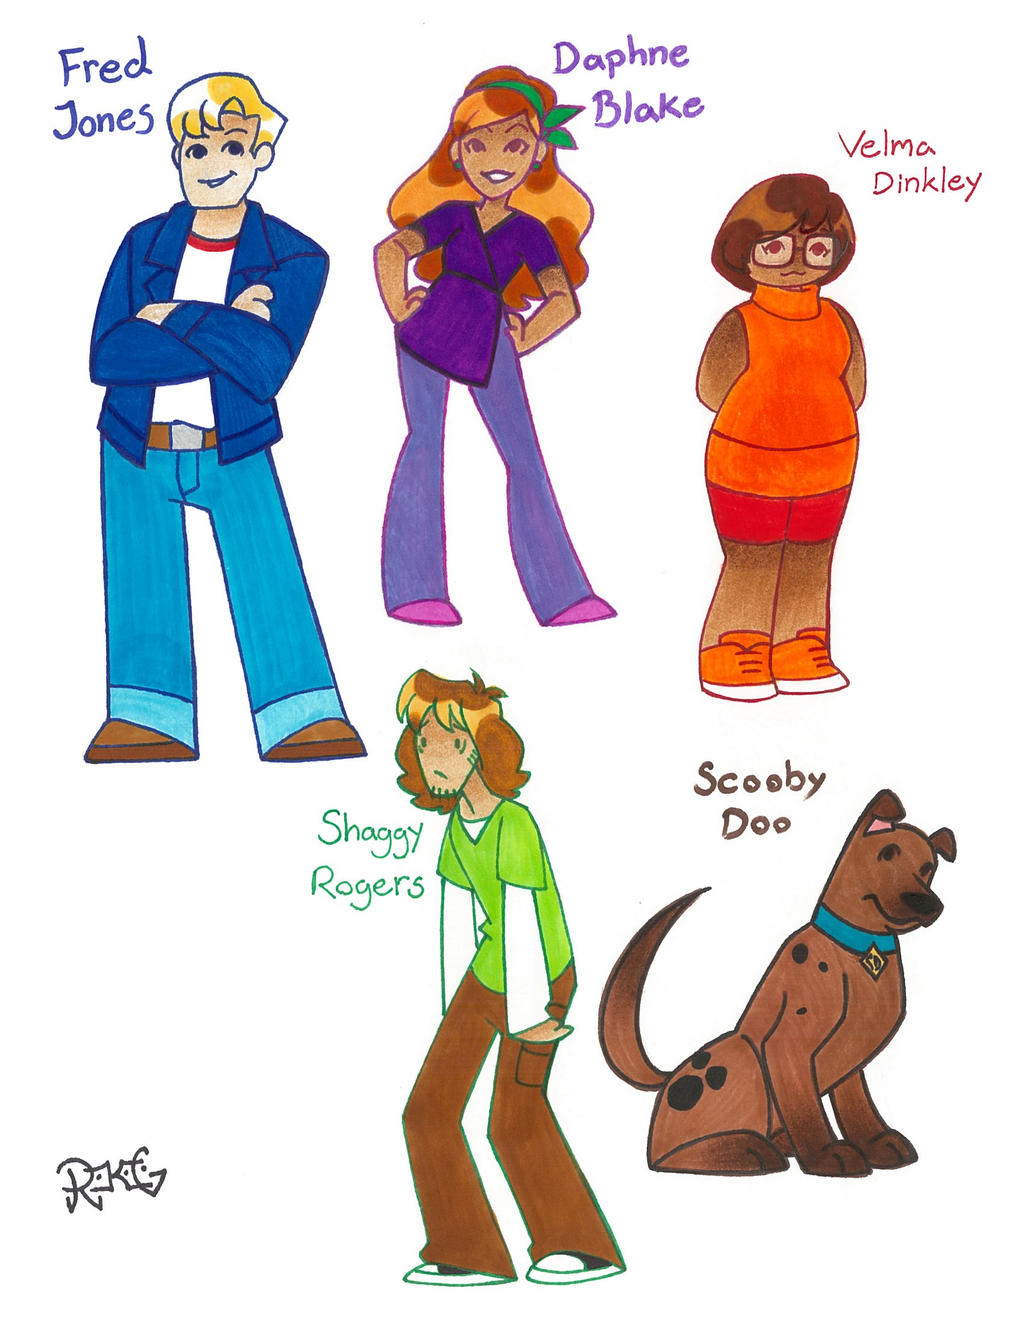 Velma' Celebrates 'Scooby-Doo' with an Adult Spin on a Classic Cartoon  Character